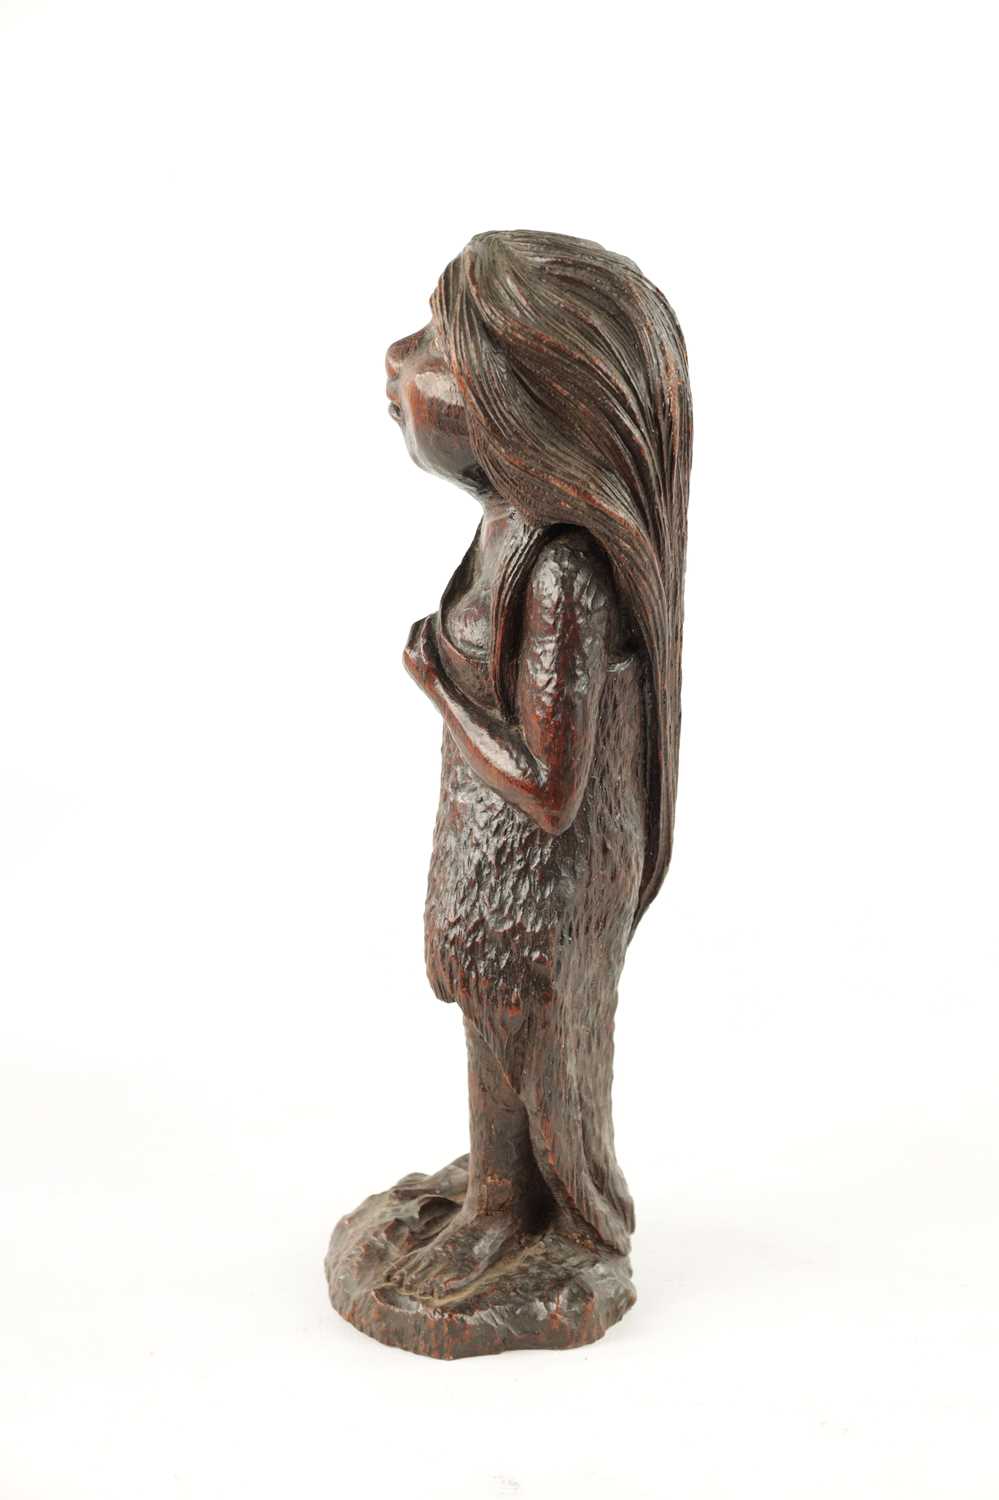 AN UNUSUAL 19TH CENTURY FOLK ARK CARVED WALNUT FIGURE OF A MYTHICAL FEMALE - Image 5 of 7